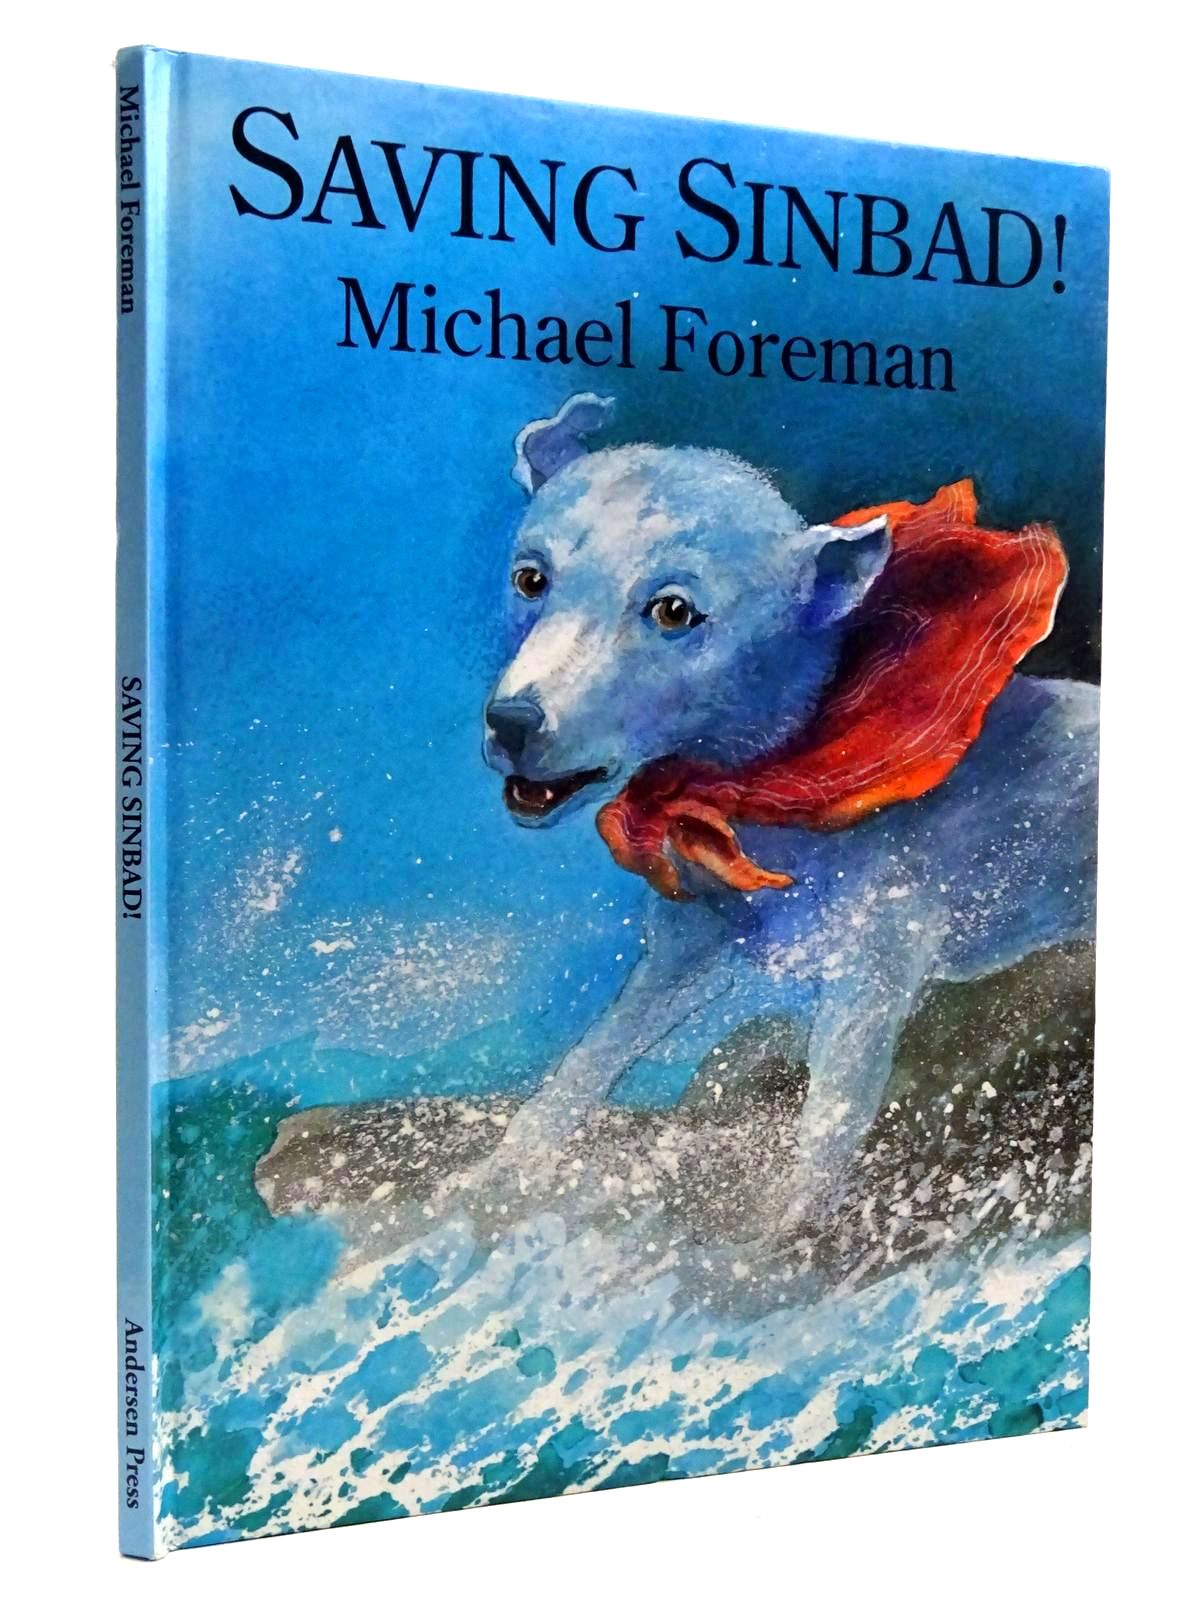 Photo of SAVING SINBAD! written by Foreman, Michael illustrated by Foreman, Michael published by Andersen Press (STOCK CODE: 2131152)  for sale by Stella & Rose's Books